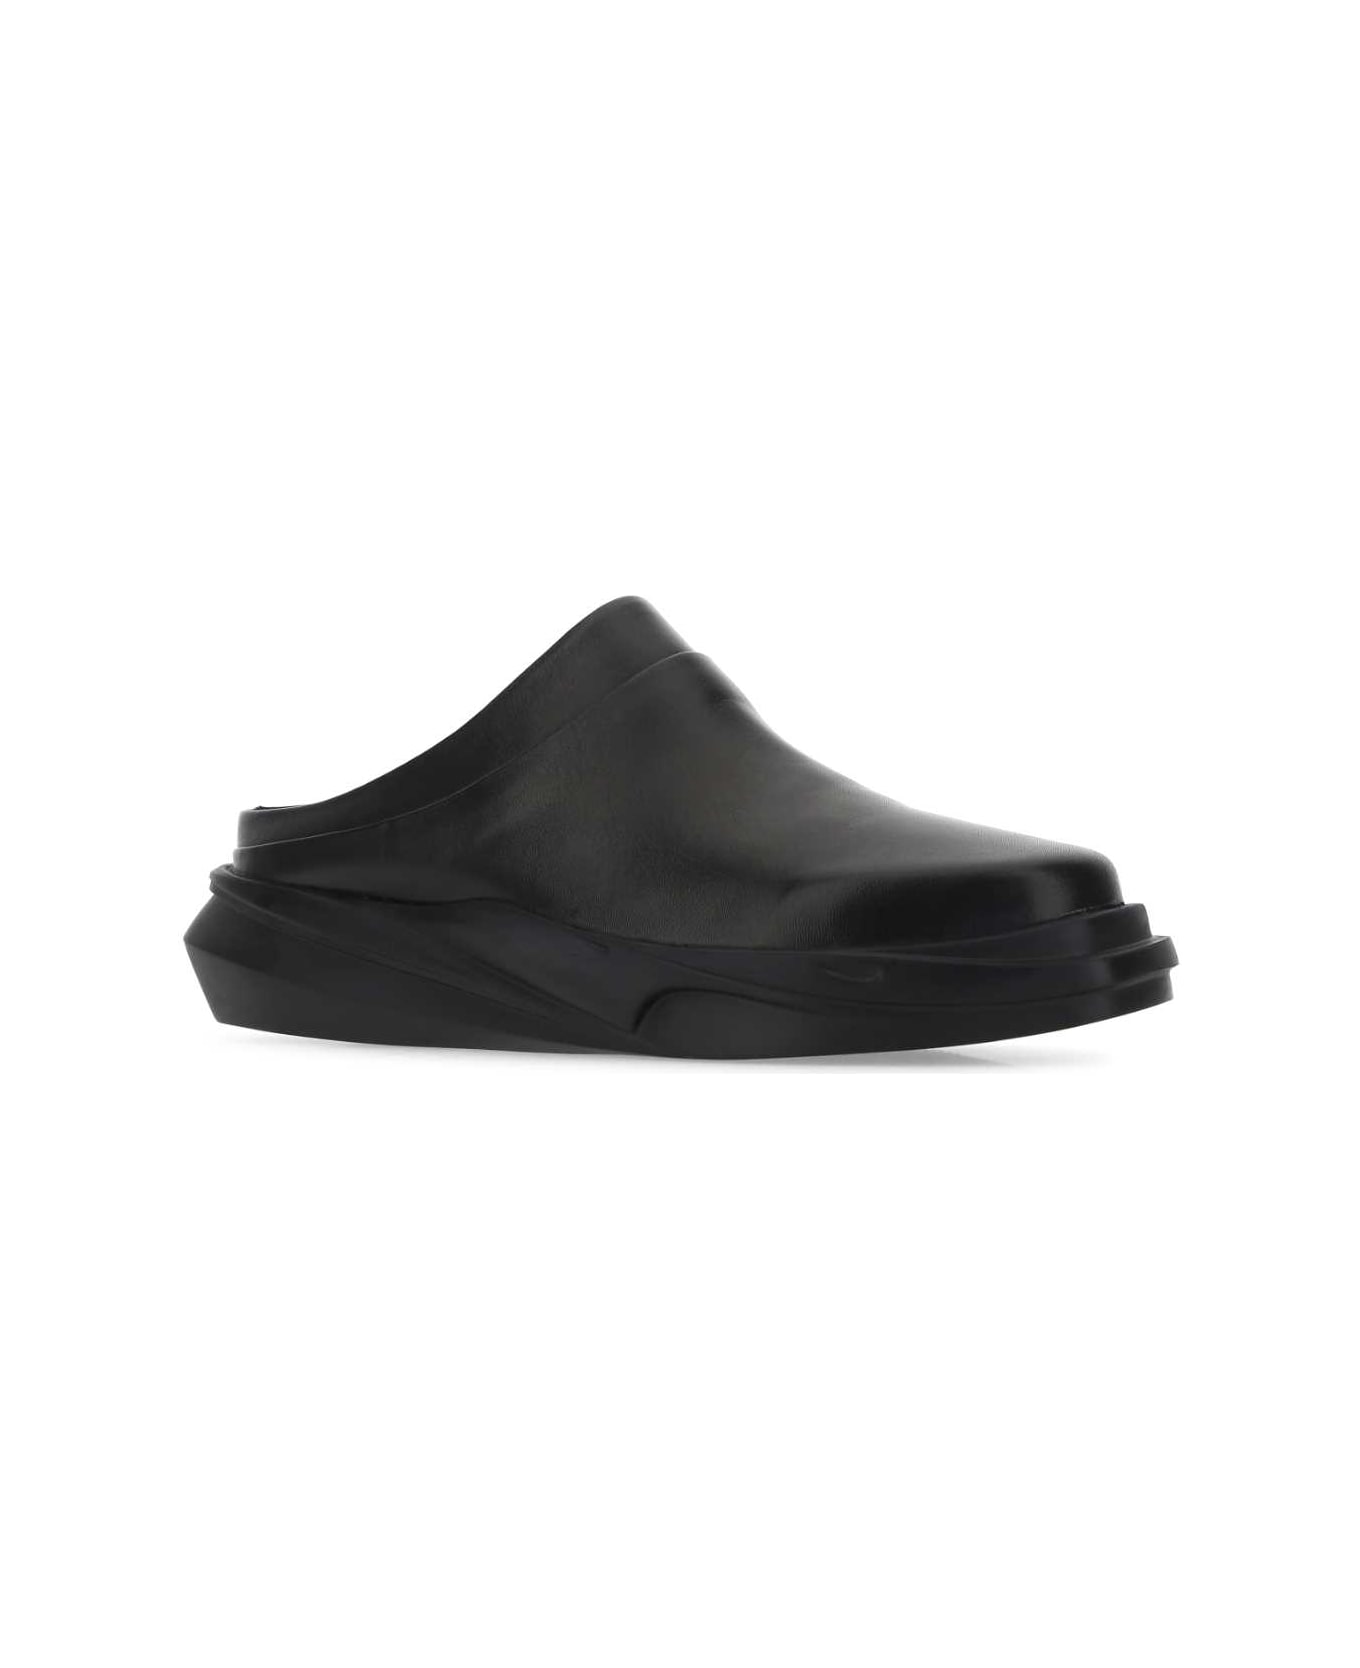 1017 ALYX 9SM Black Leather Mono Slippers - BLK0001 その他各種シューズ